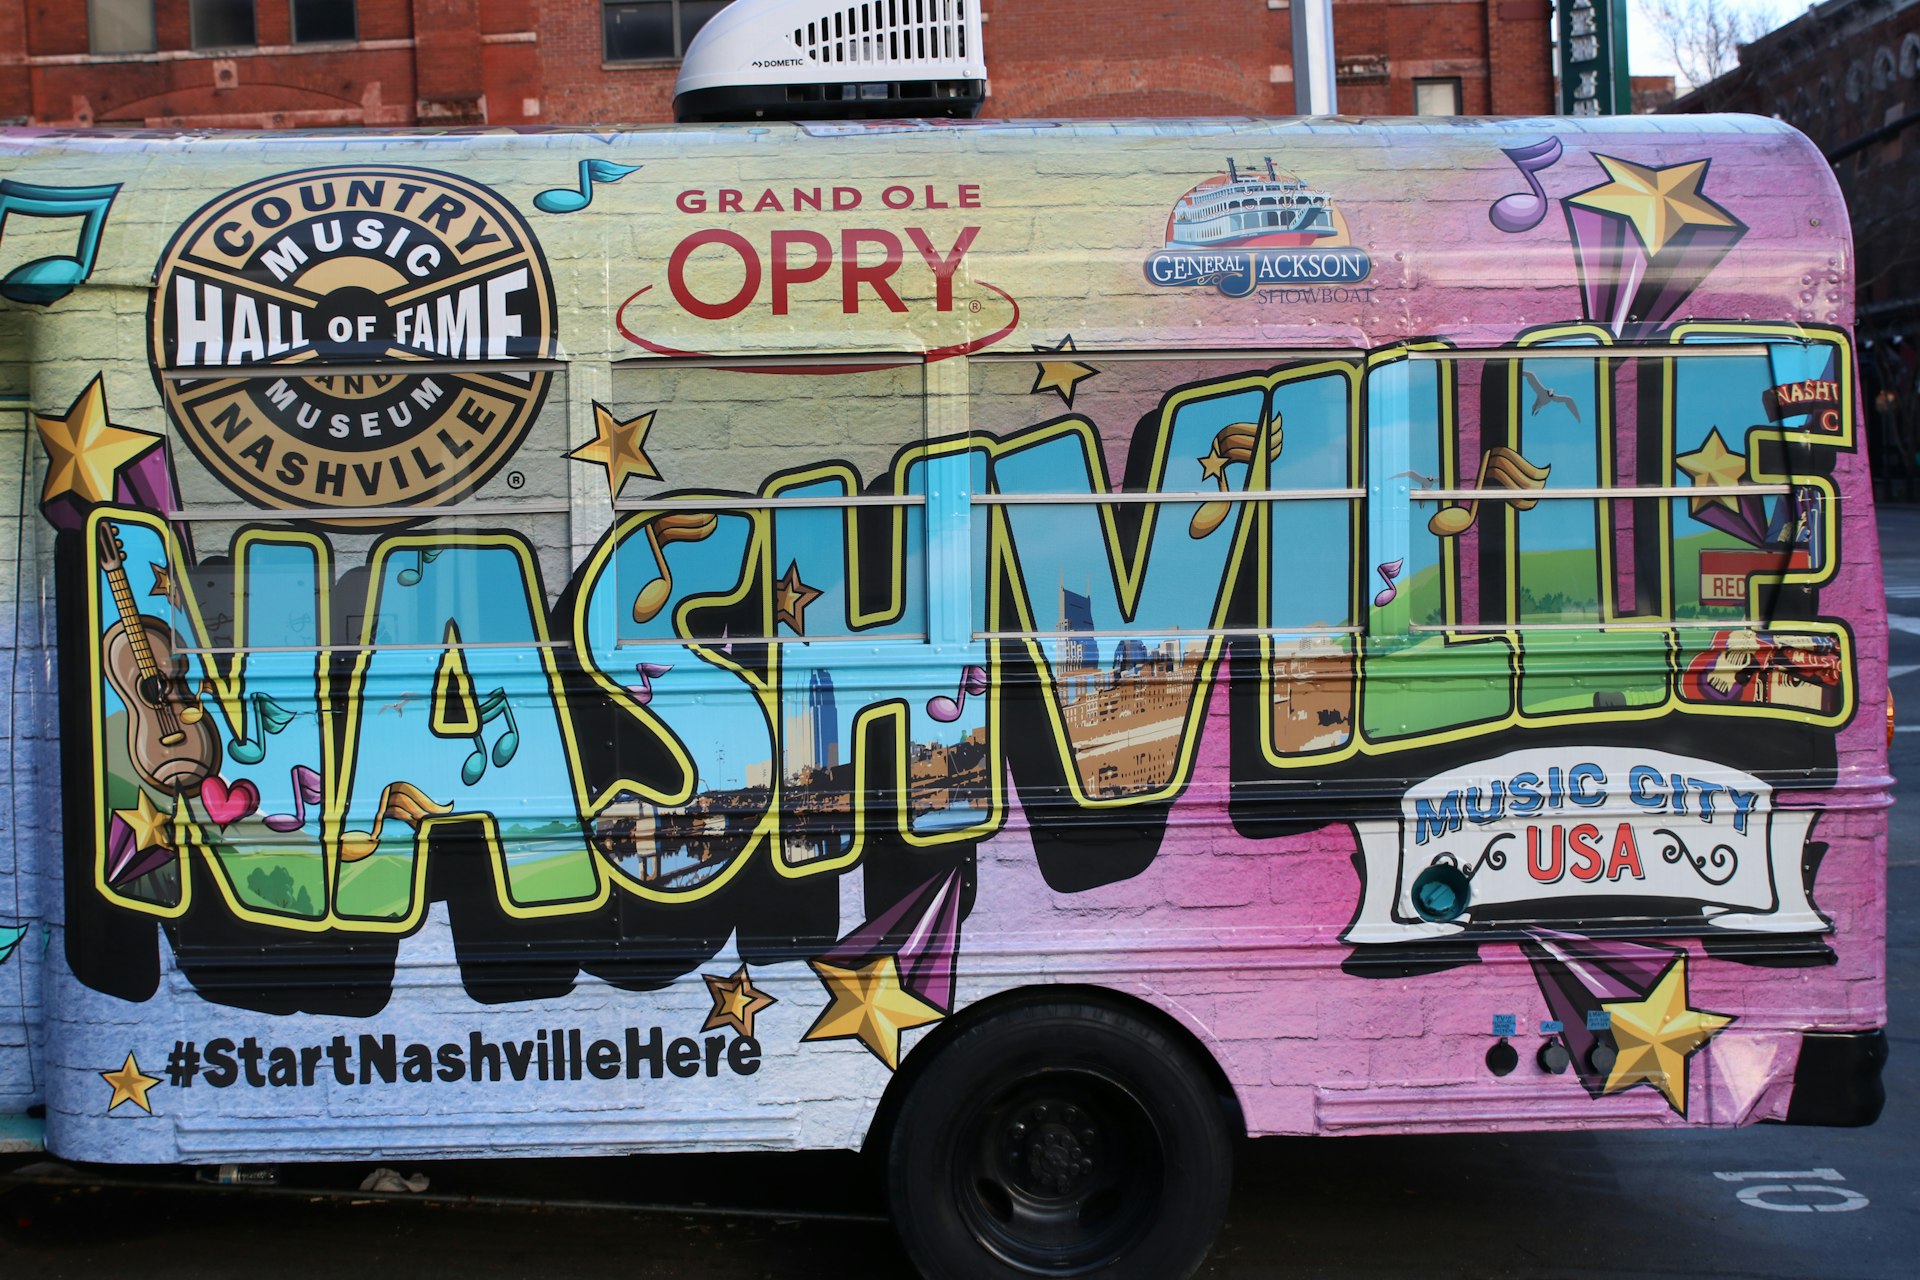 The side view of a parked bus which is emblazoned with 'Nashville' on the size parked in the city of the same name